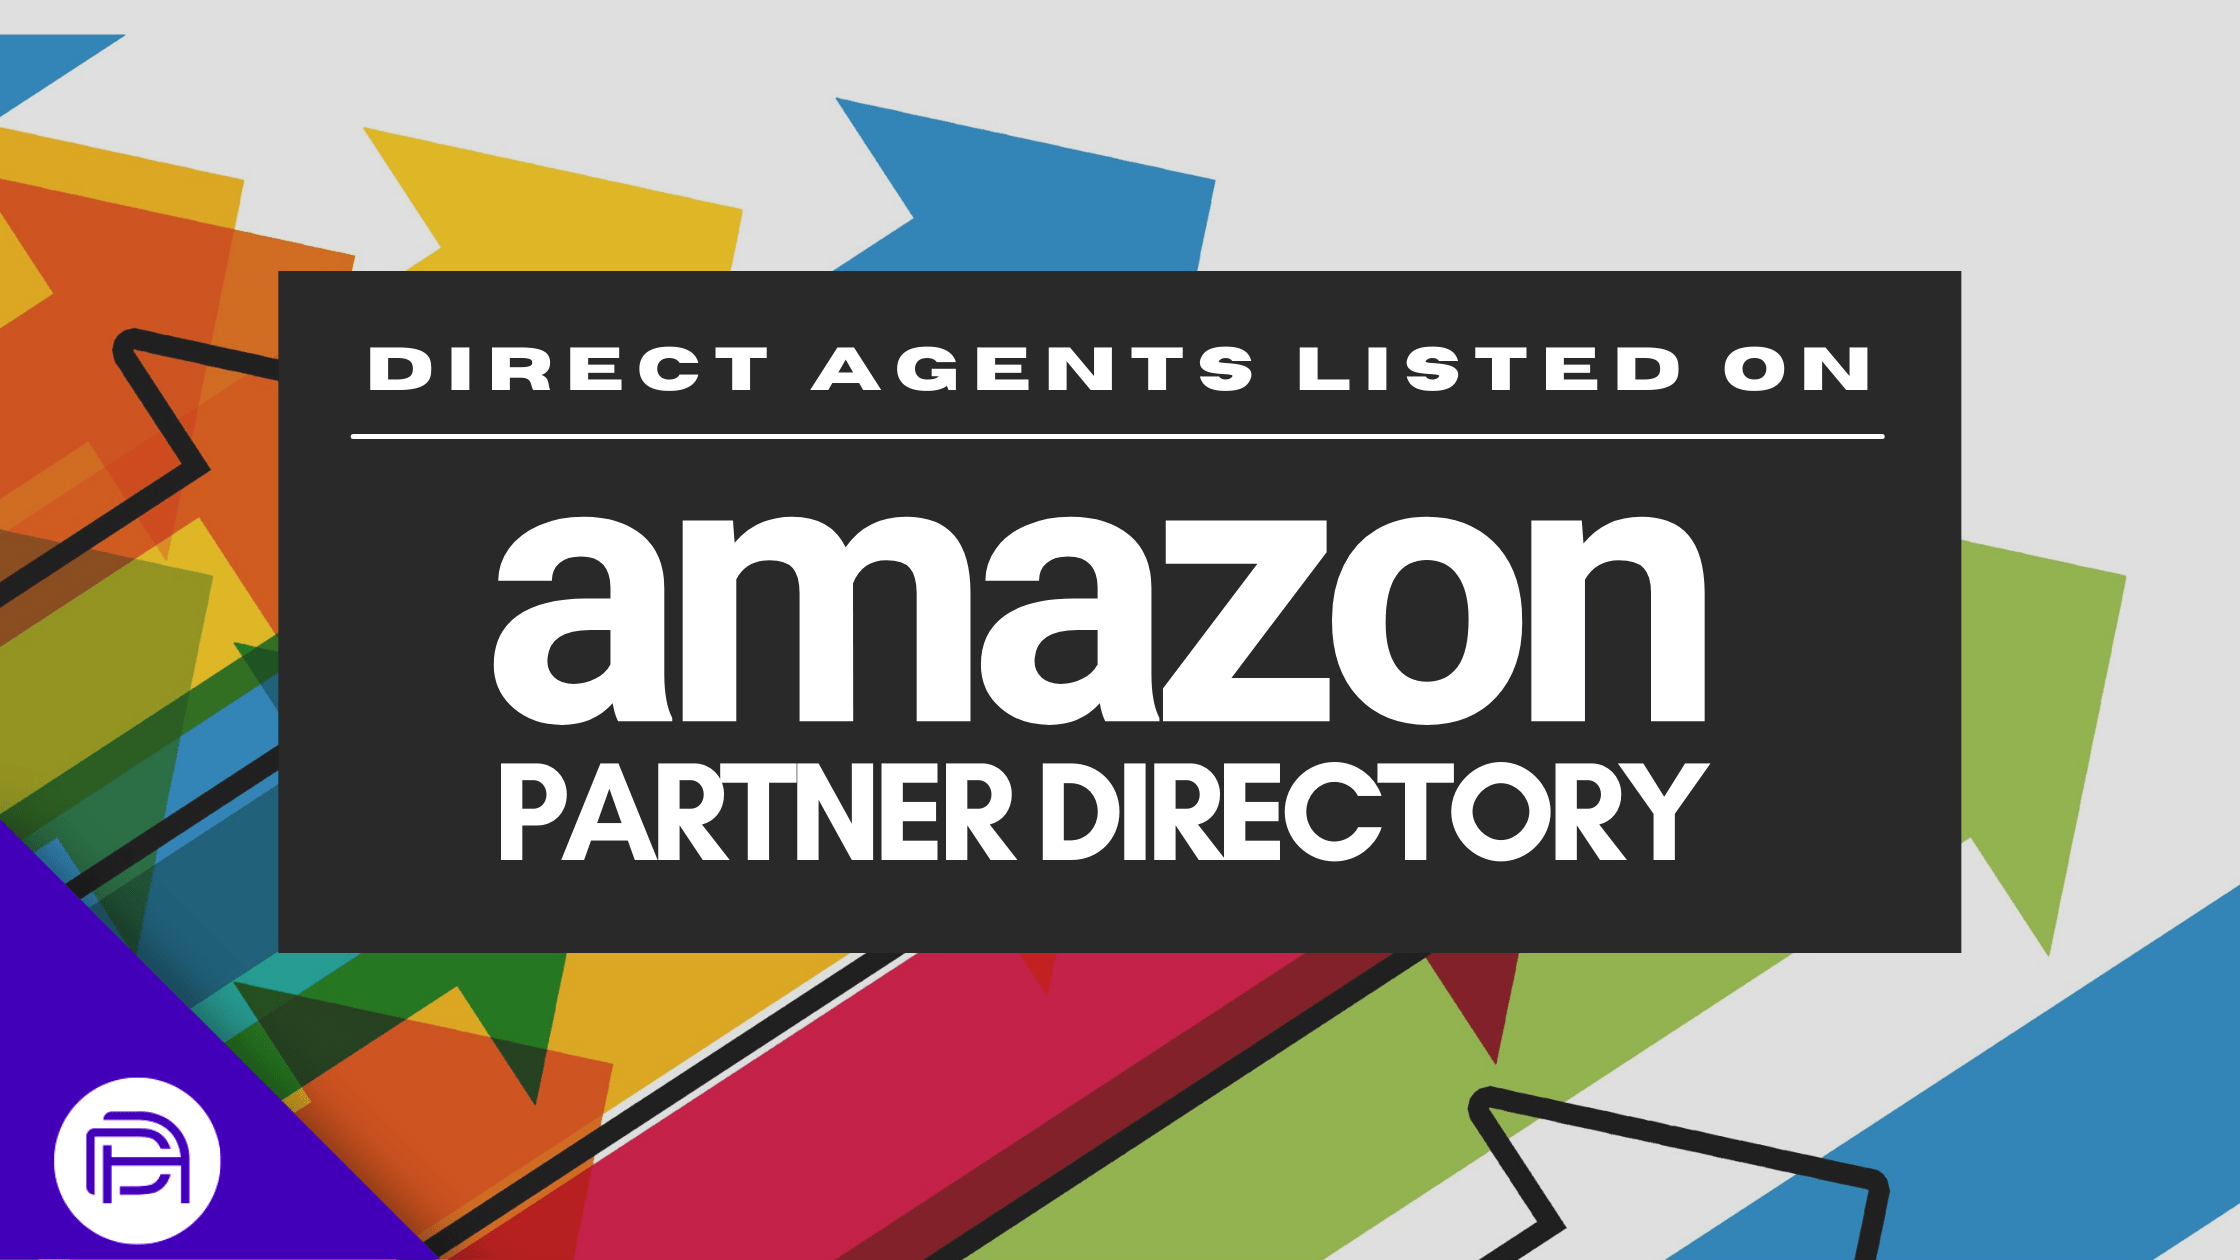 Direct Agents Listed on Amazon Partner Directory